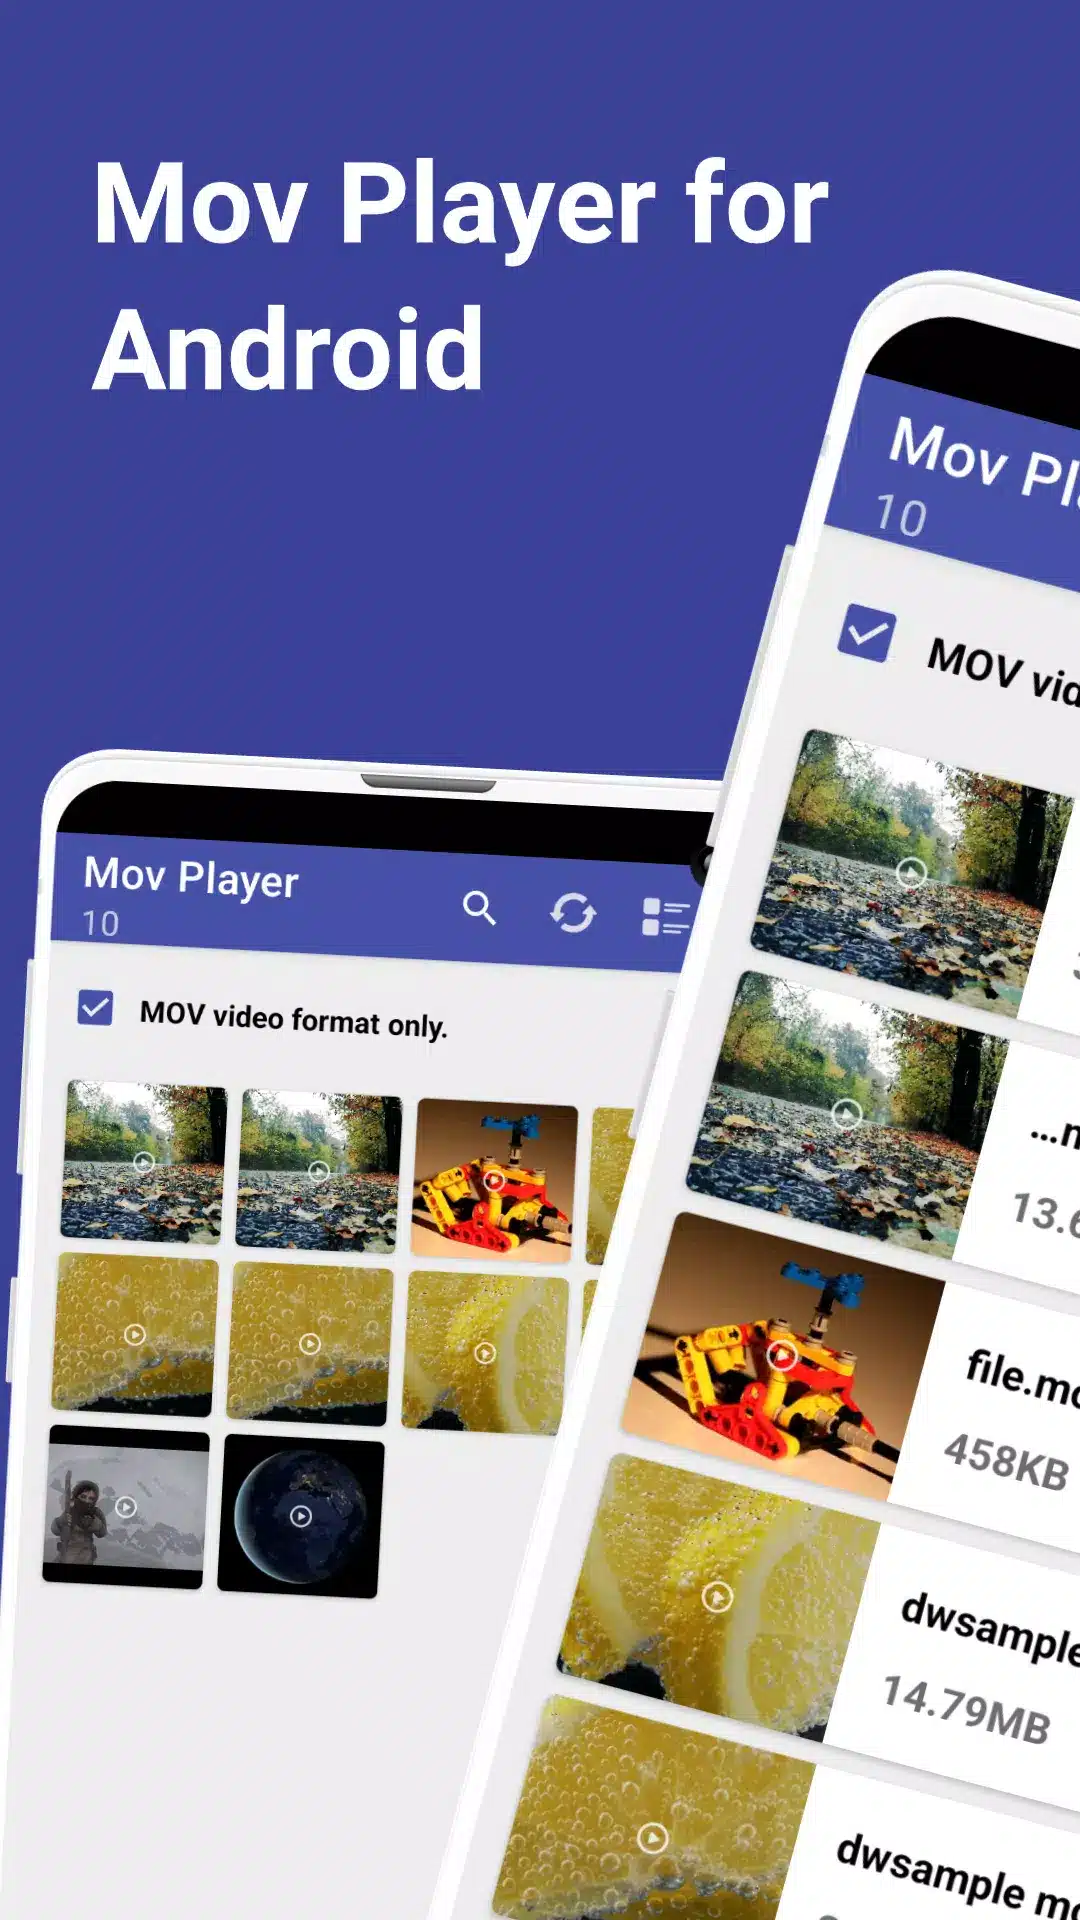 MOV Player For Android Image 1